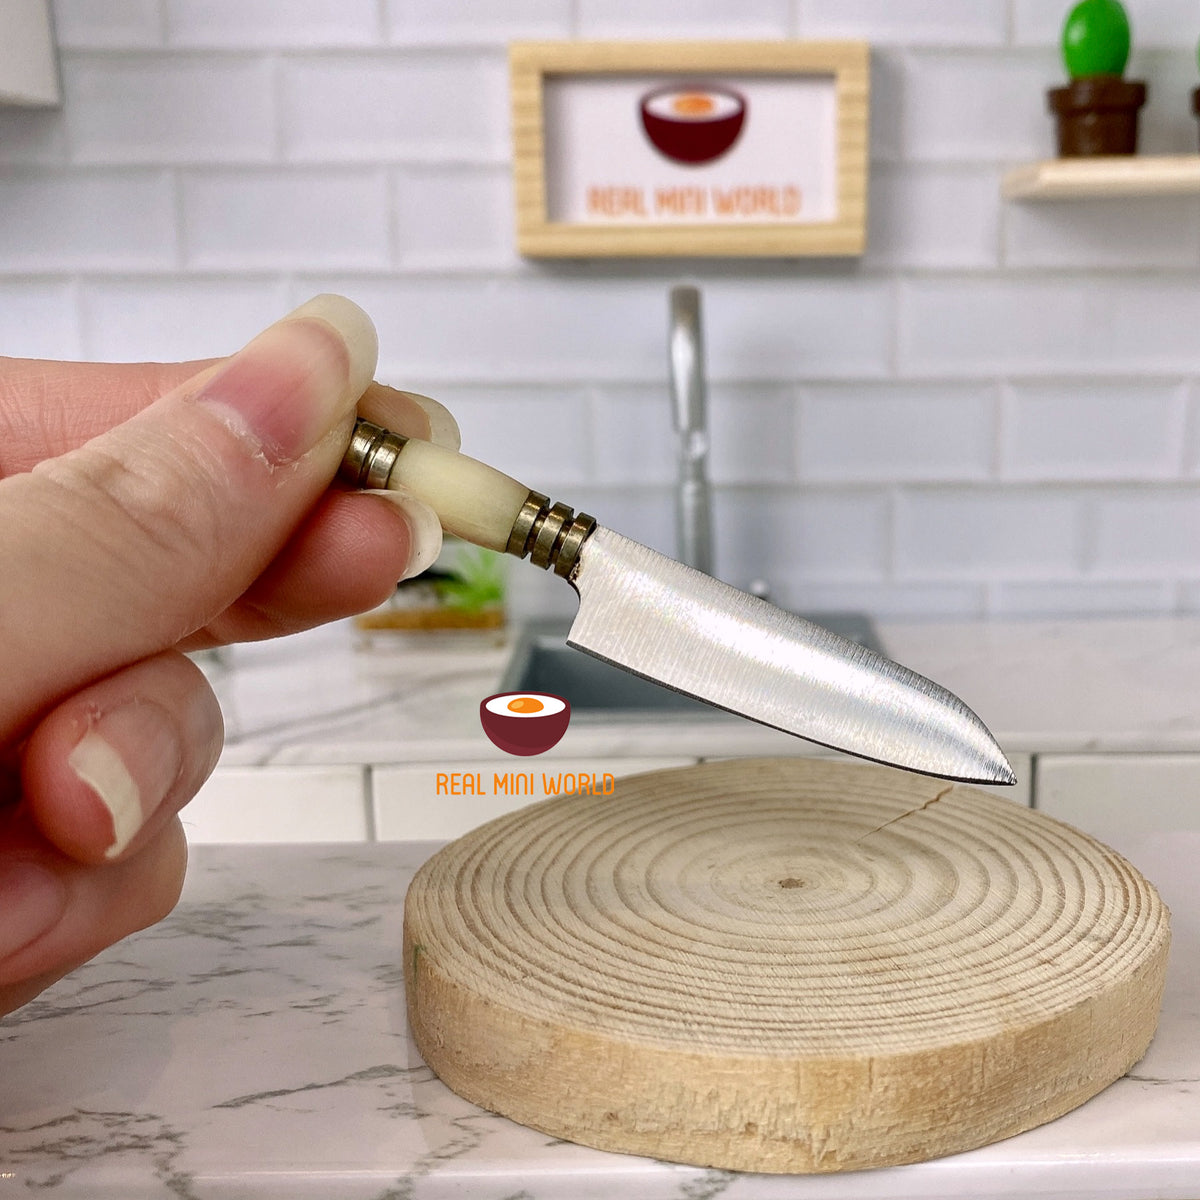 Mini 1.5 - Worlds smallest Chef Knife Set for you!